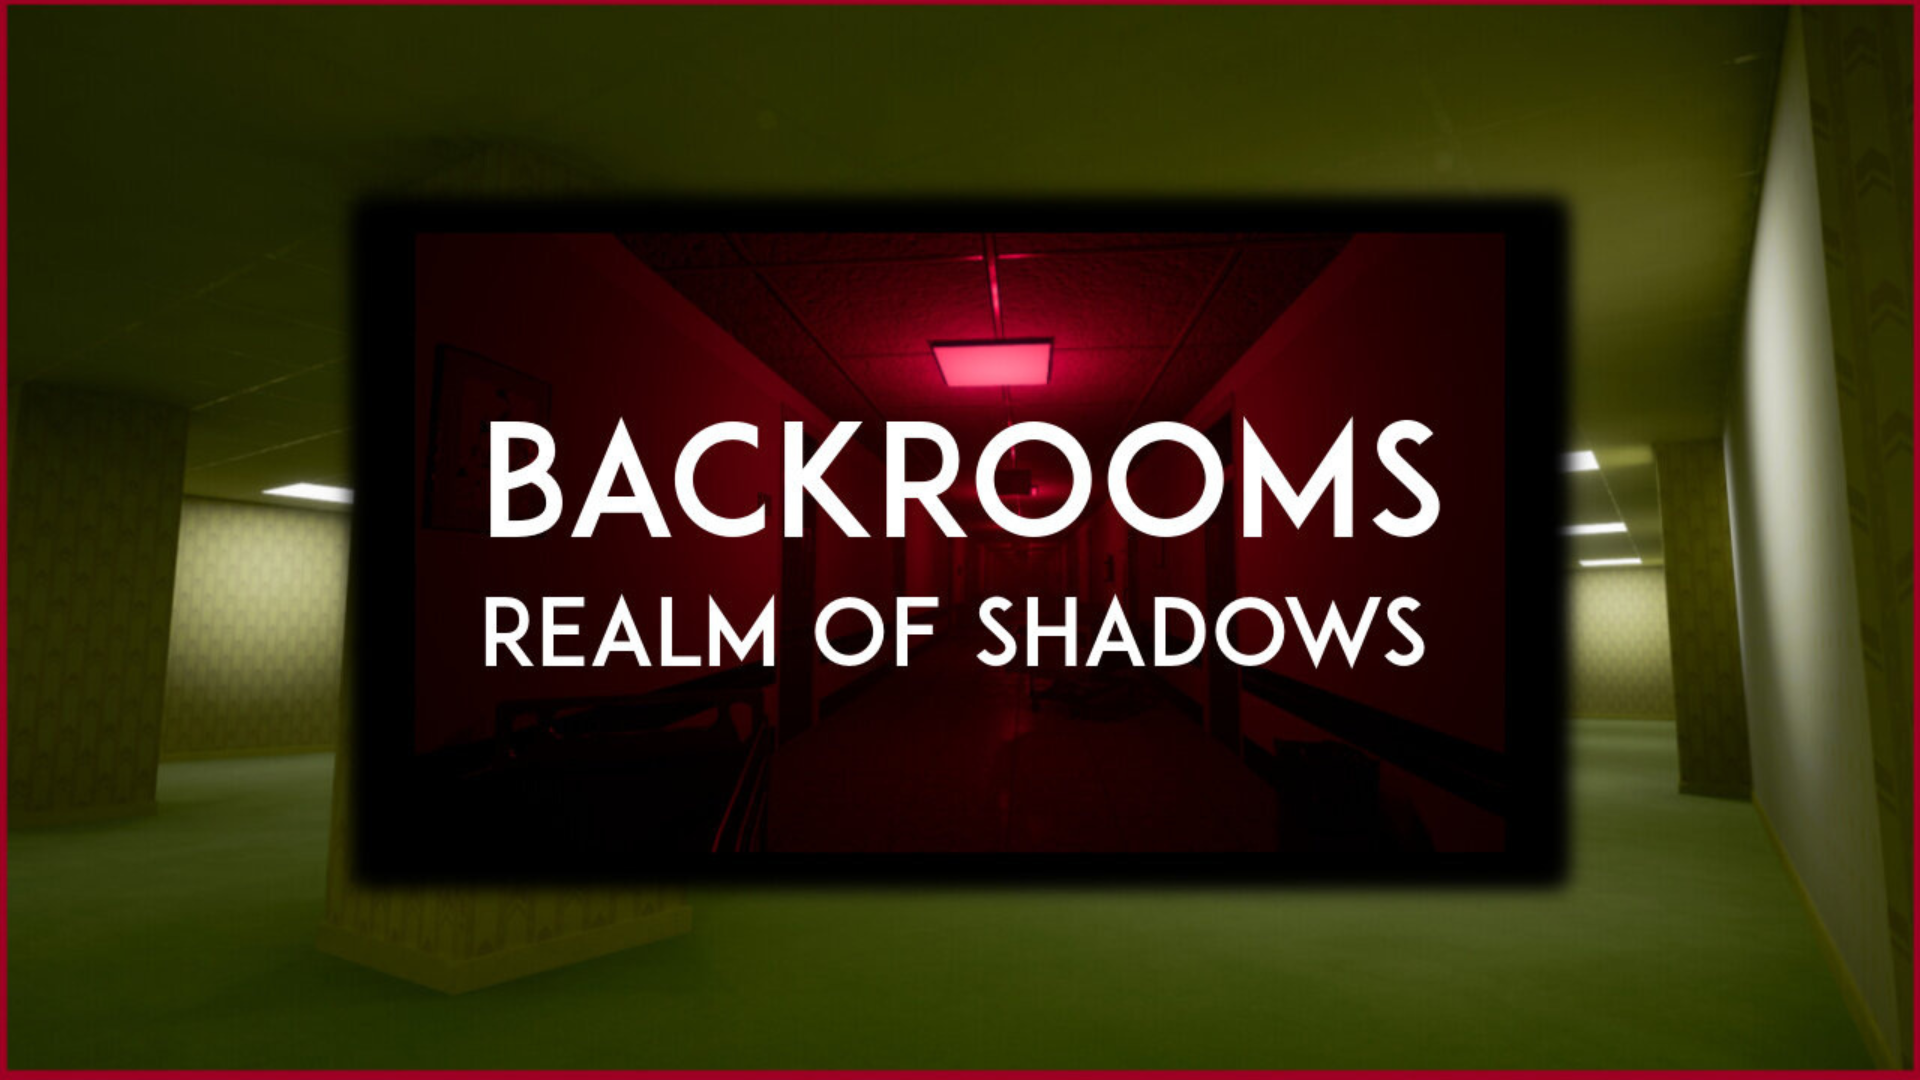 Backrooms: Realm of Shadows  Download and Play for Free - Epic Games Store